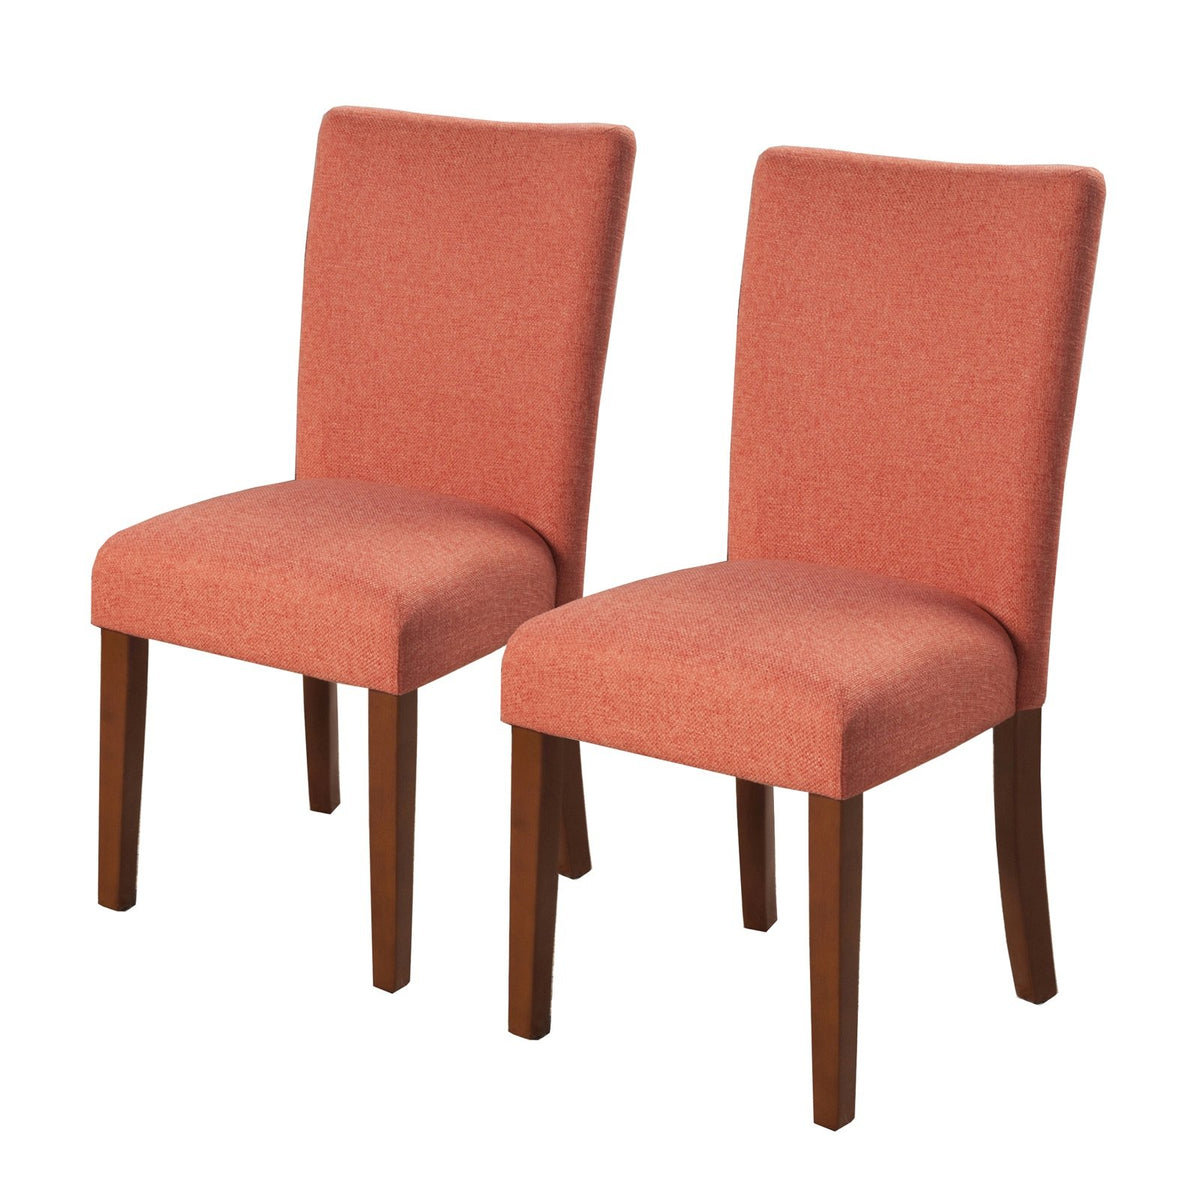 BM196090 - Fabric Upholstered Parson Dining Chair with Wooden Legs, Orange and Brown, Set of Two